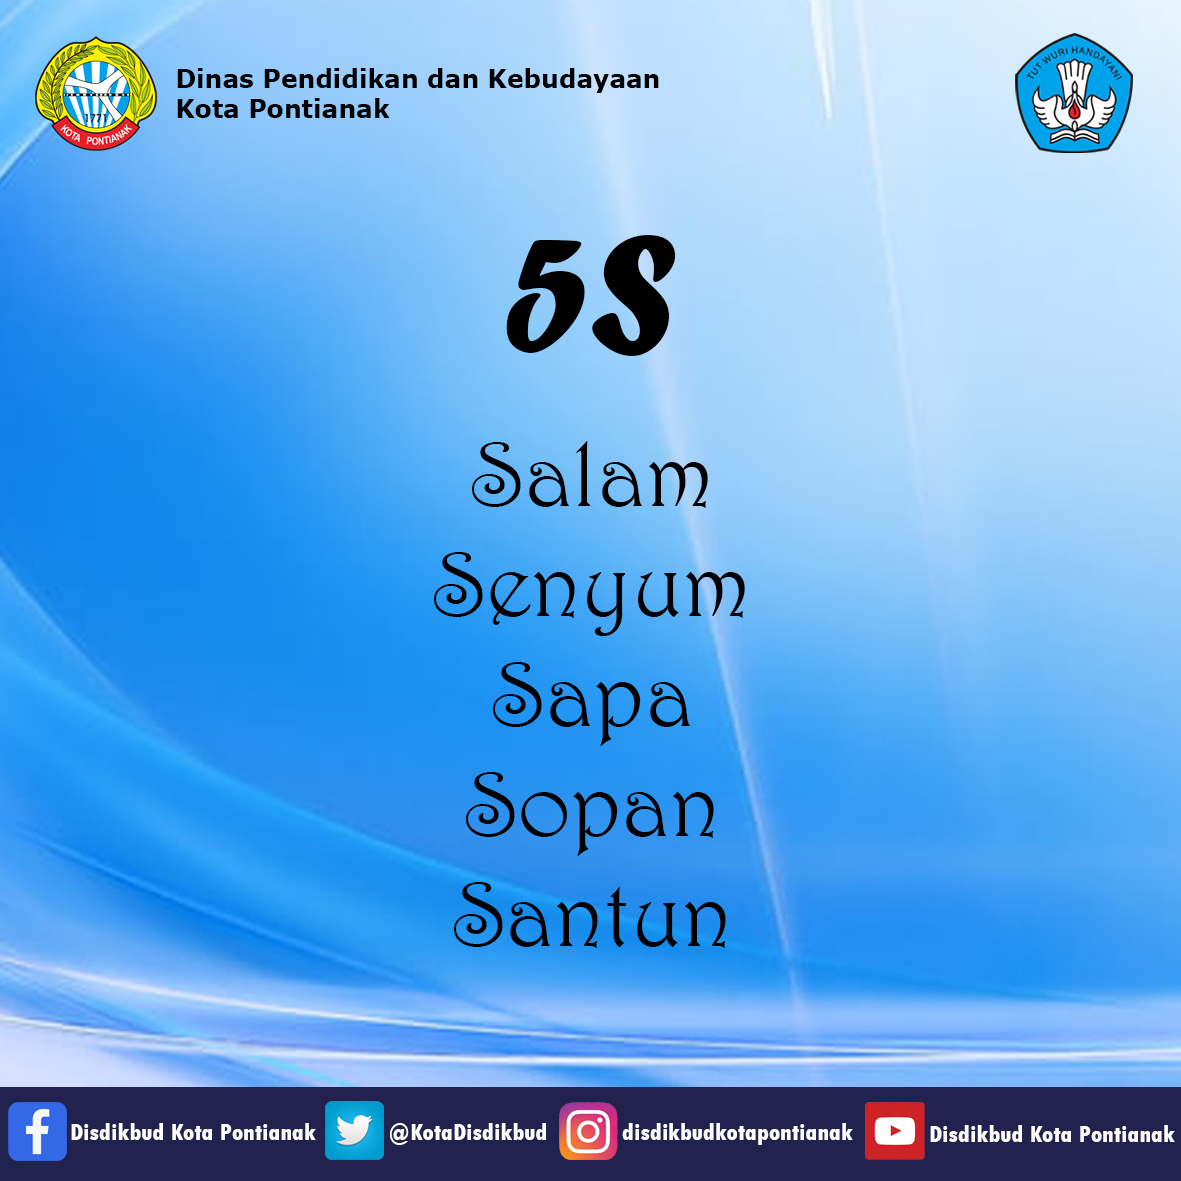 5s.jpg (510 K<img style='width:20px;height:20px;' src='https://disdikbud.pontianak.go.id/images/smiley/cool.svg' alt='Cool' style='vertical-align:middle;' />